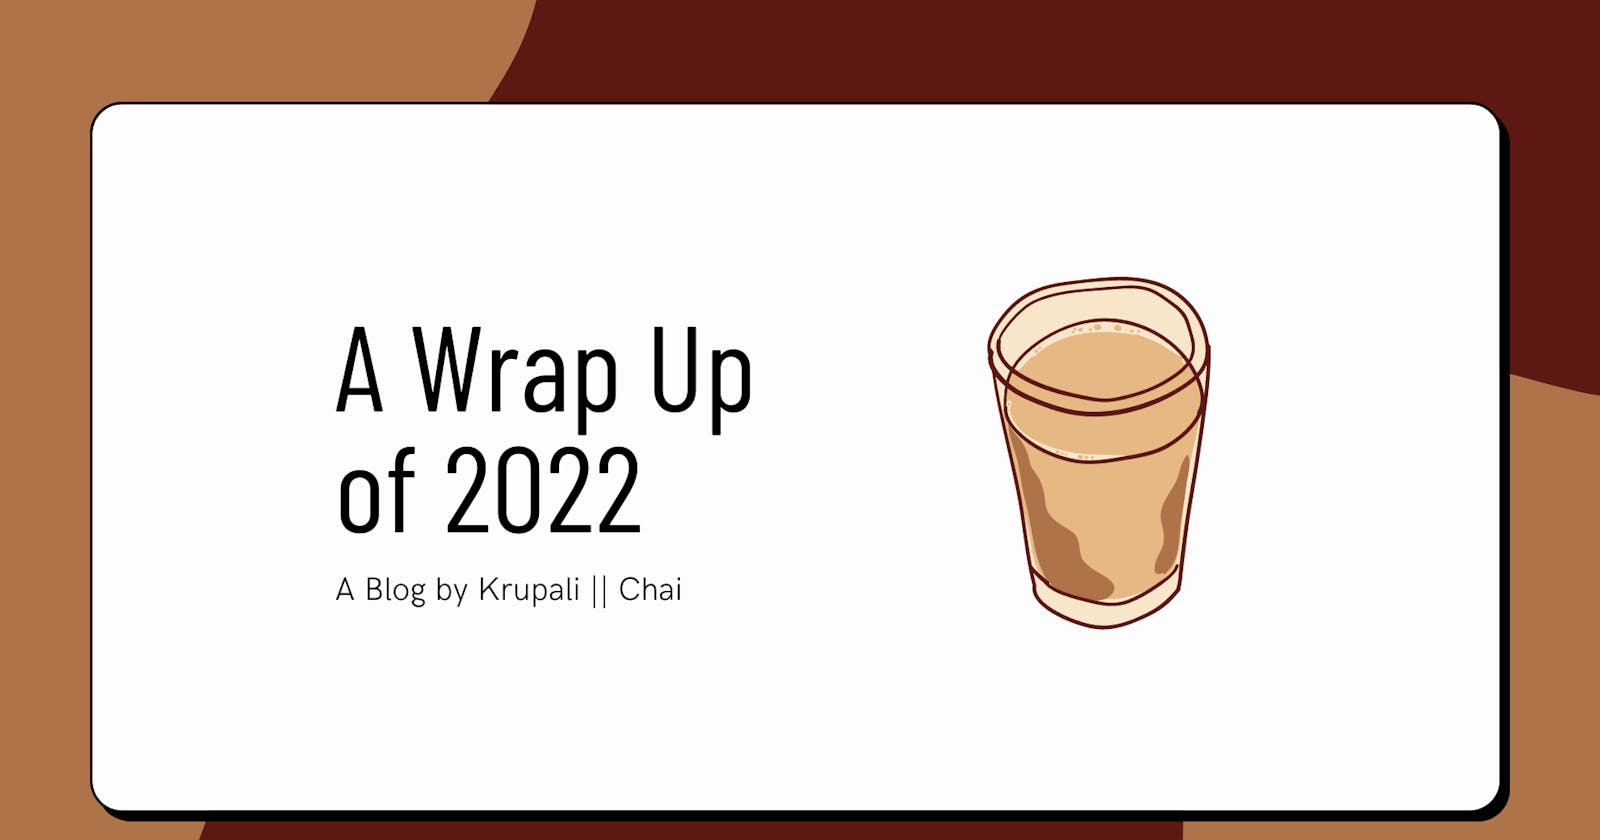 A Wrap of 2022 with Chai